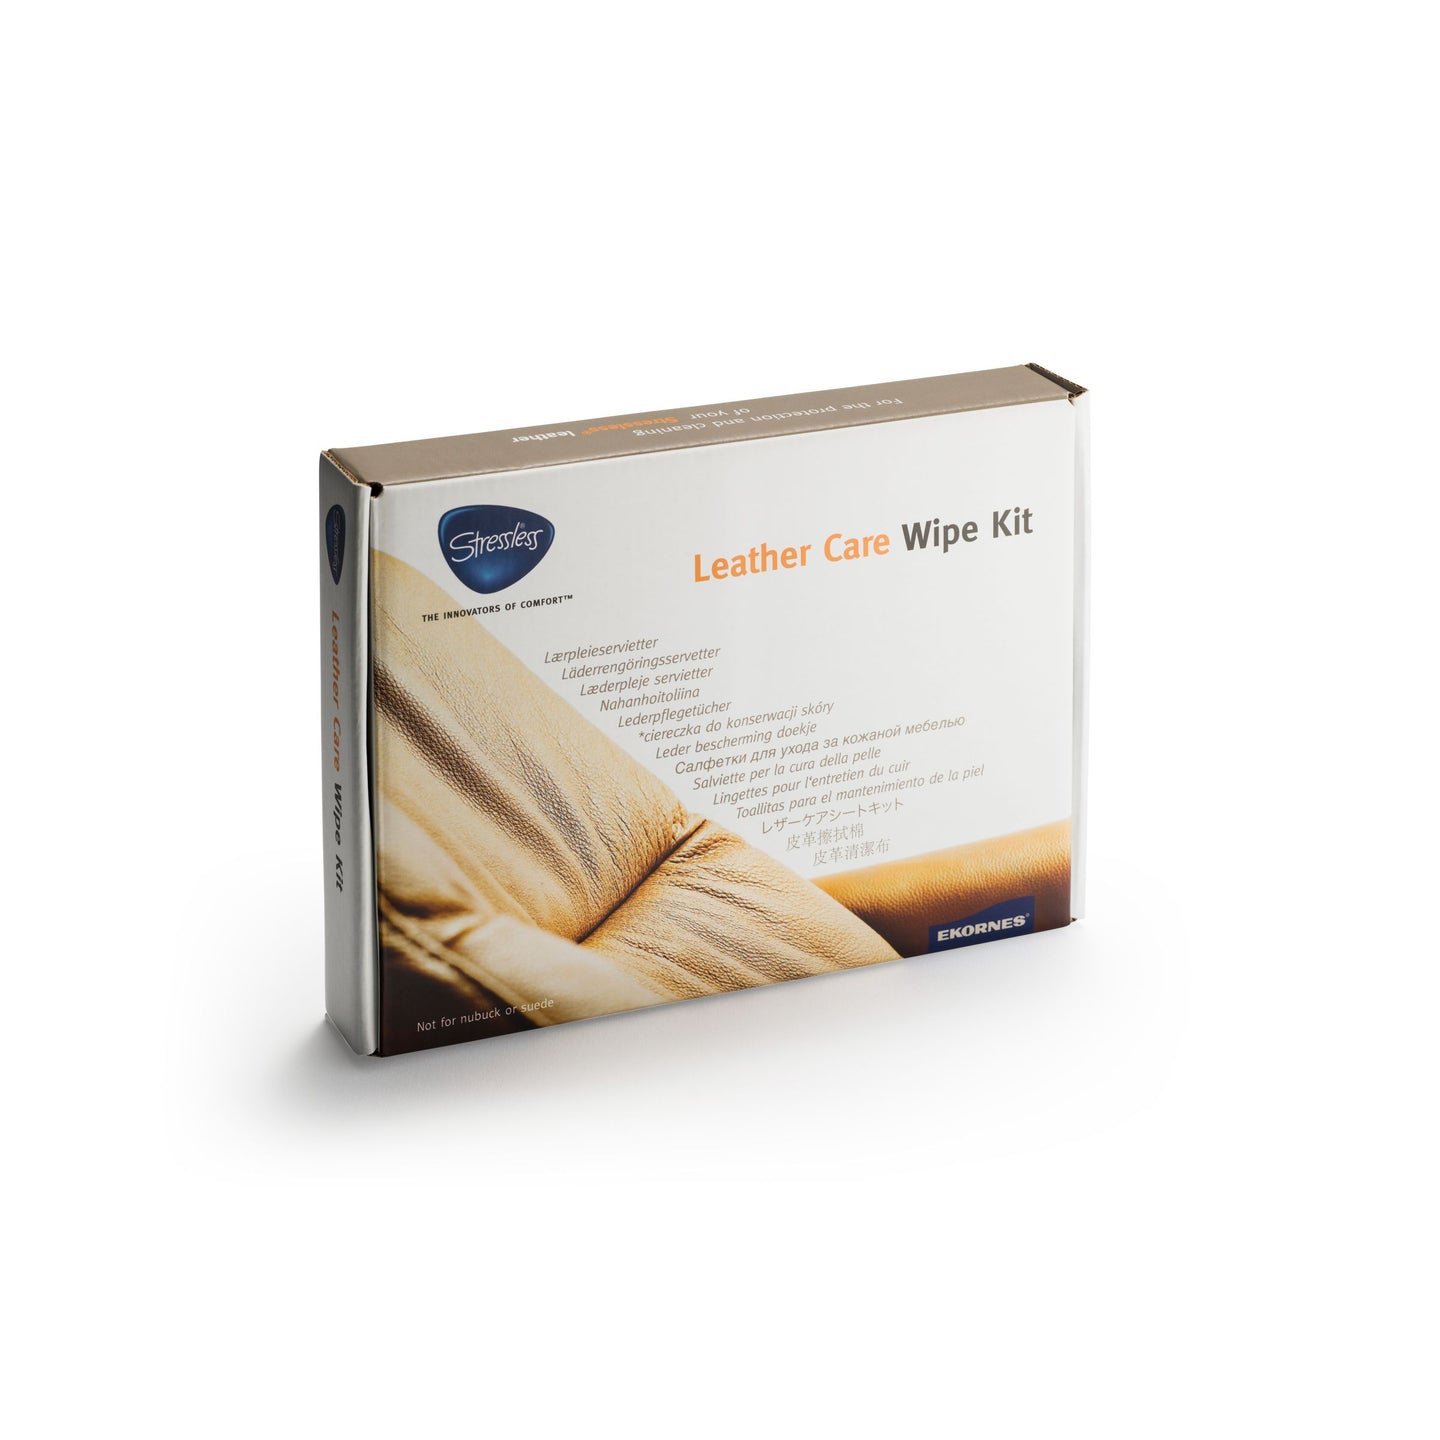 Stressless Leather Care wipe kit